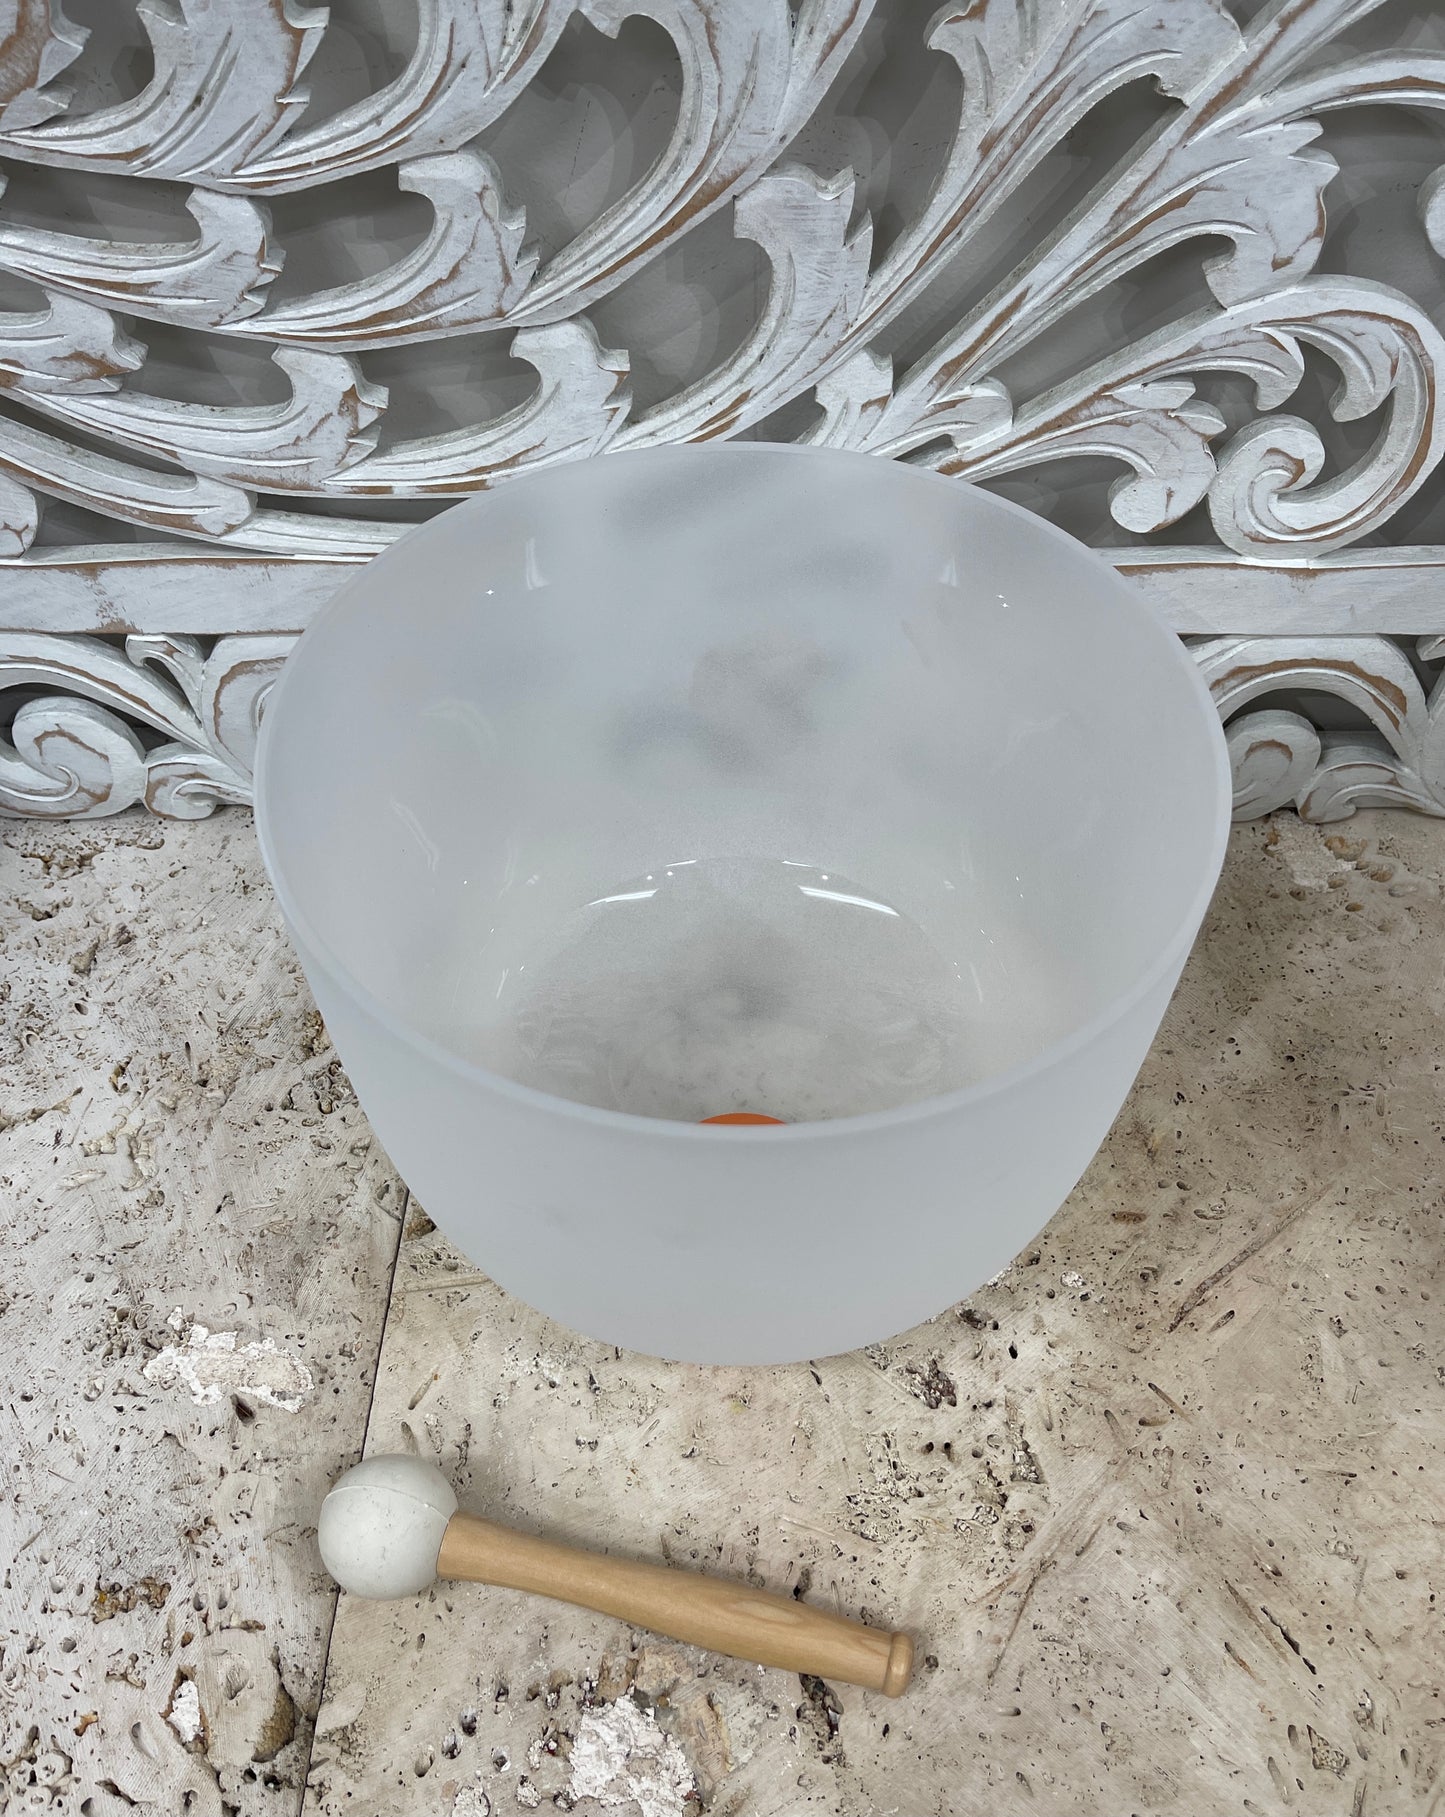 Quartz Crystal Singing bowls - Available in sizes 7" - 12"